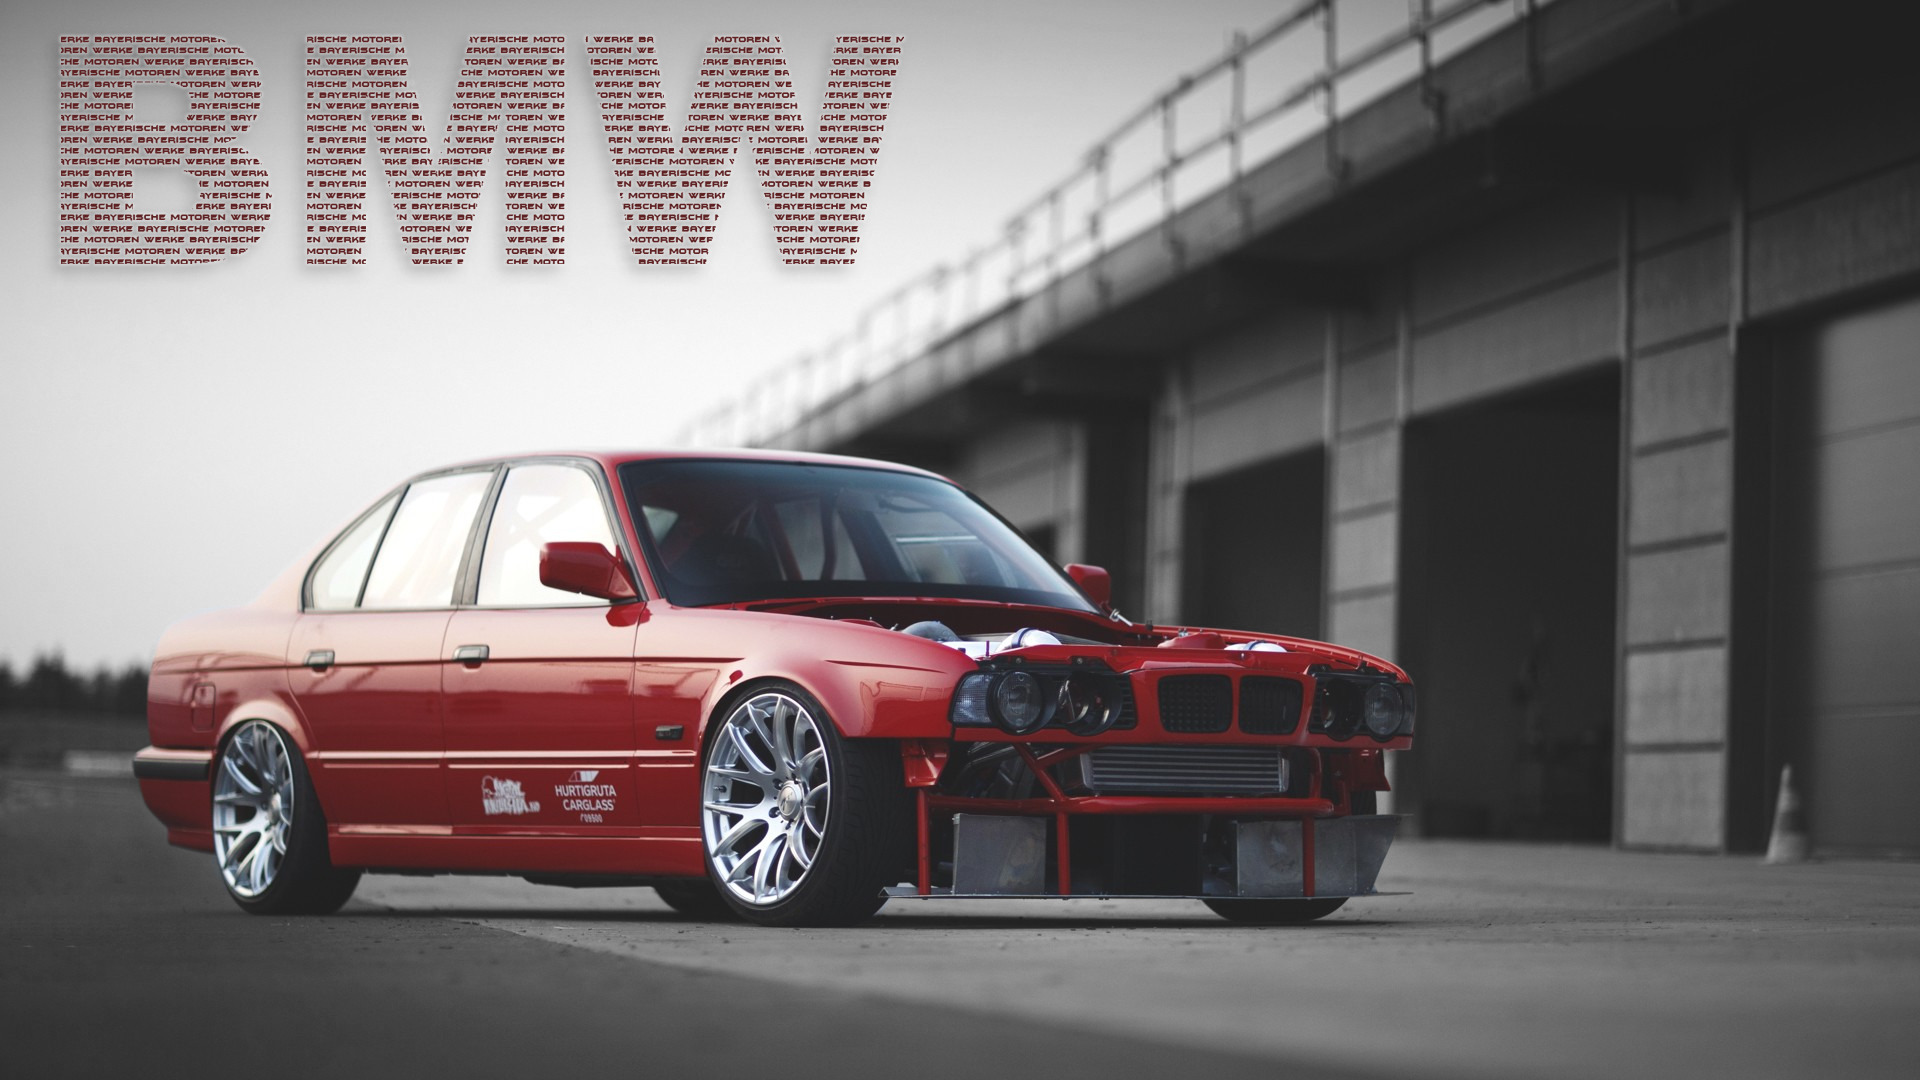 Bmw  Tuning  Garages Wallpapers Hd    Desktop And Mobile